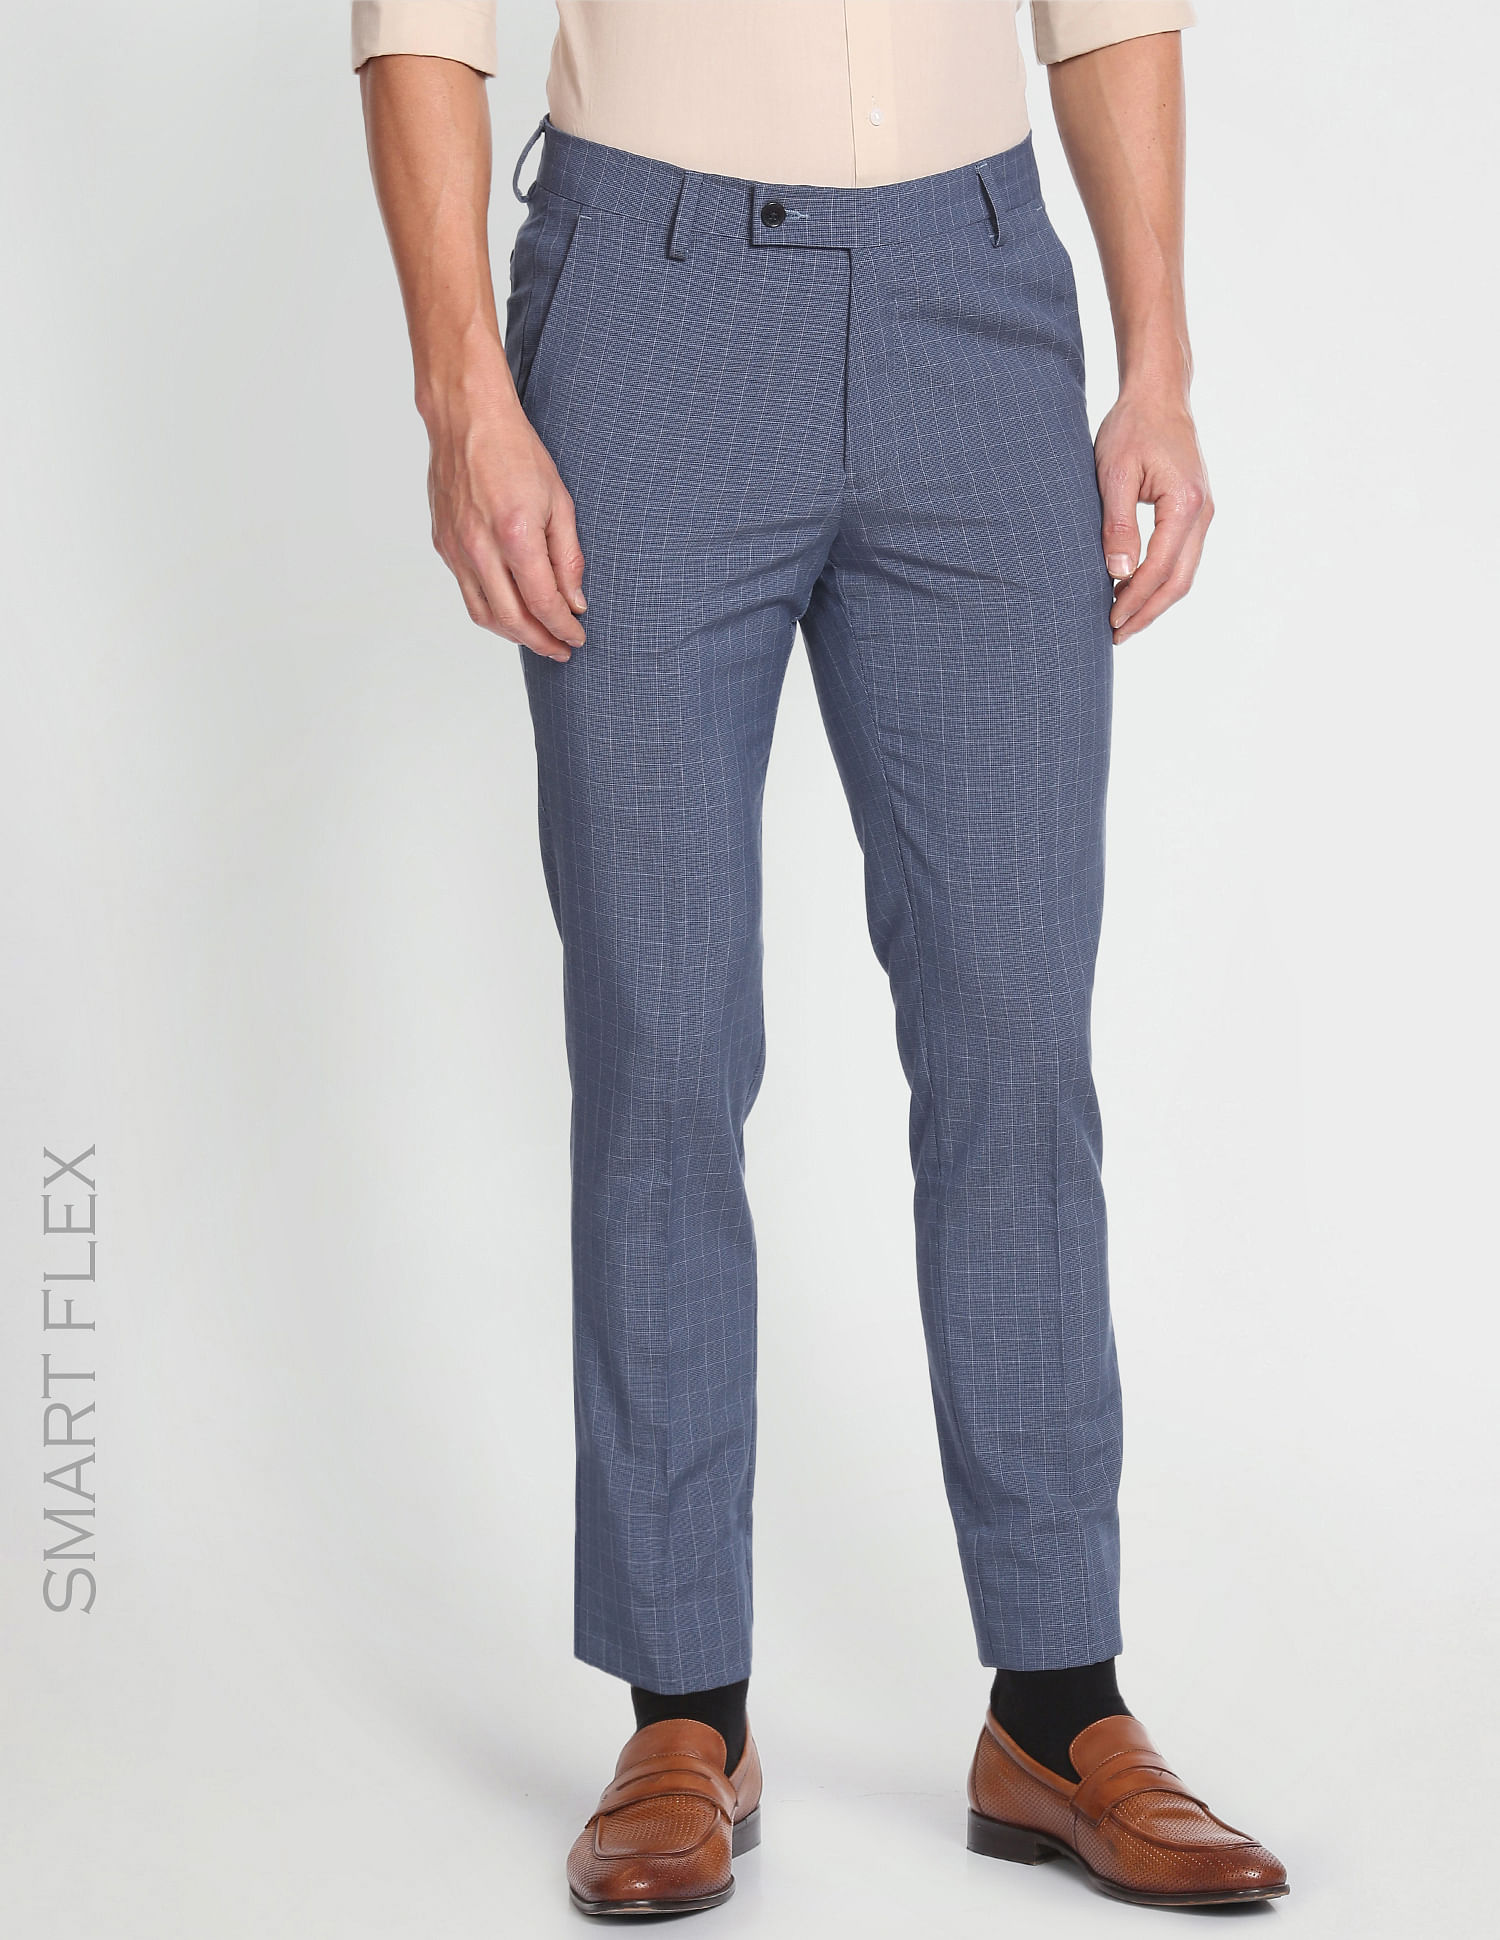 Buy Charcoal Grey Trousers & Pants for Men by ALTHEORY Online | Ajio.com